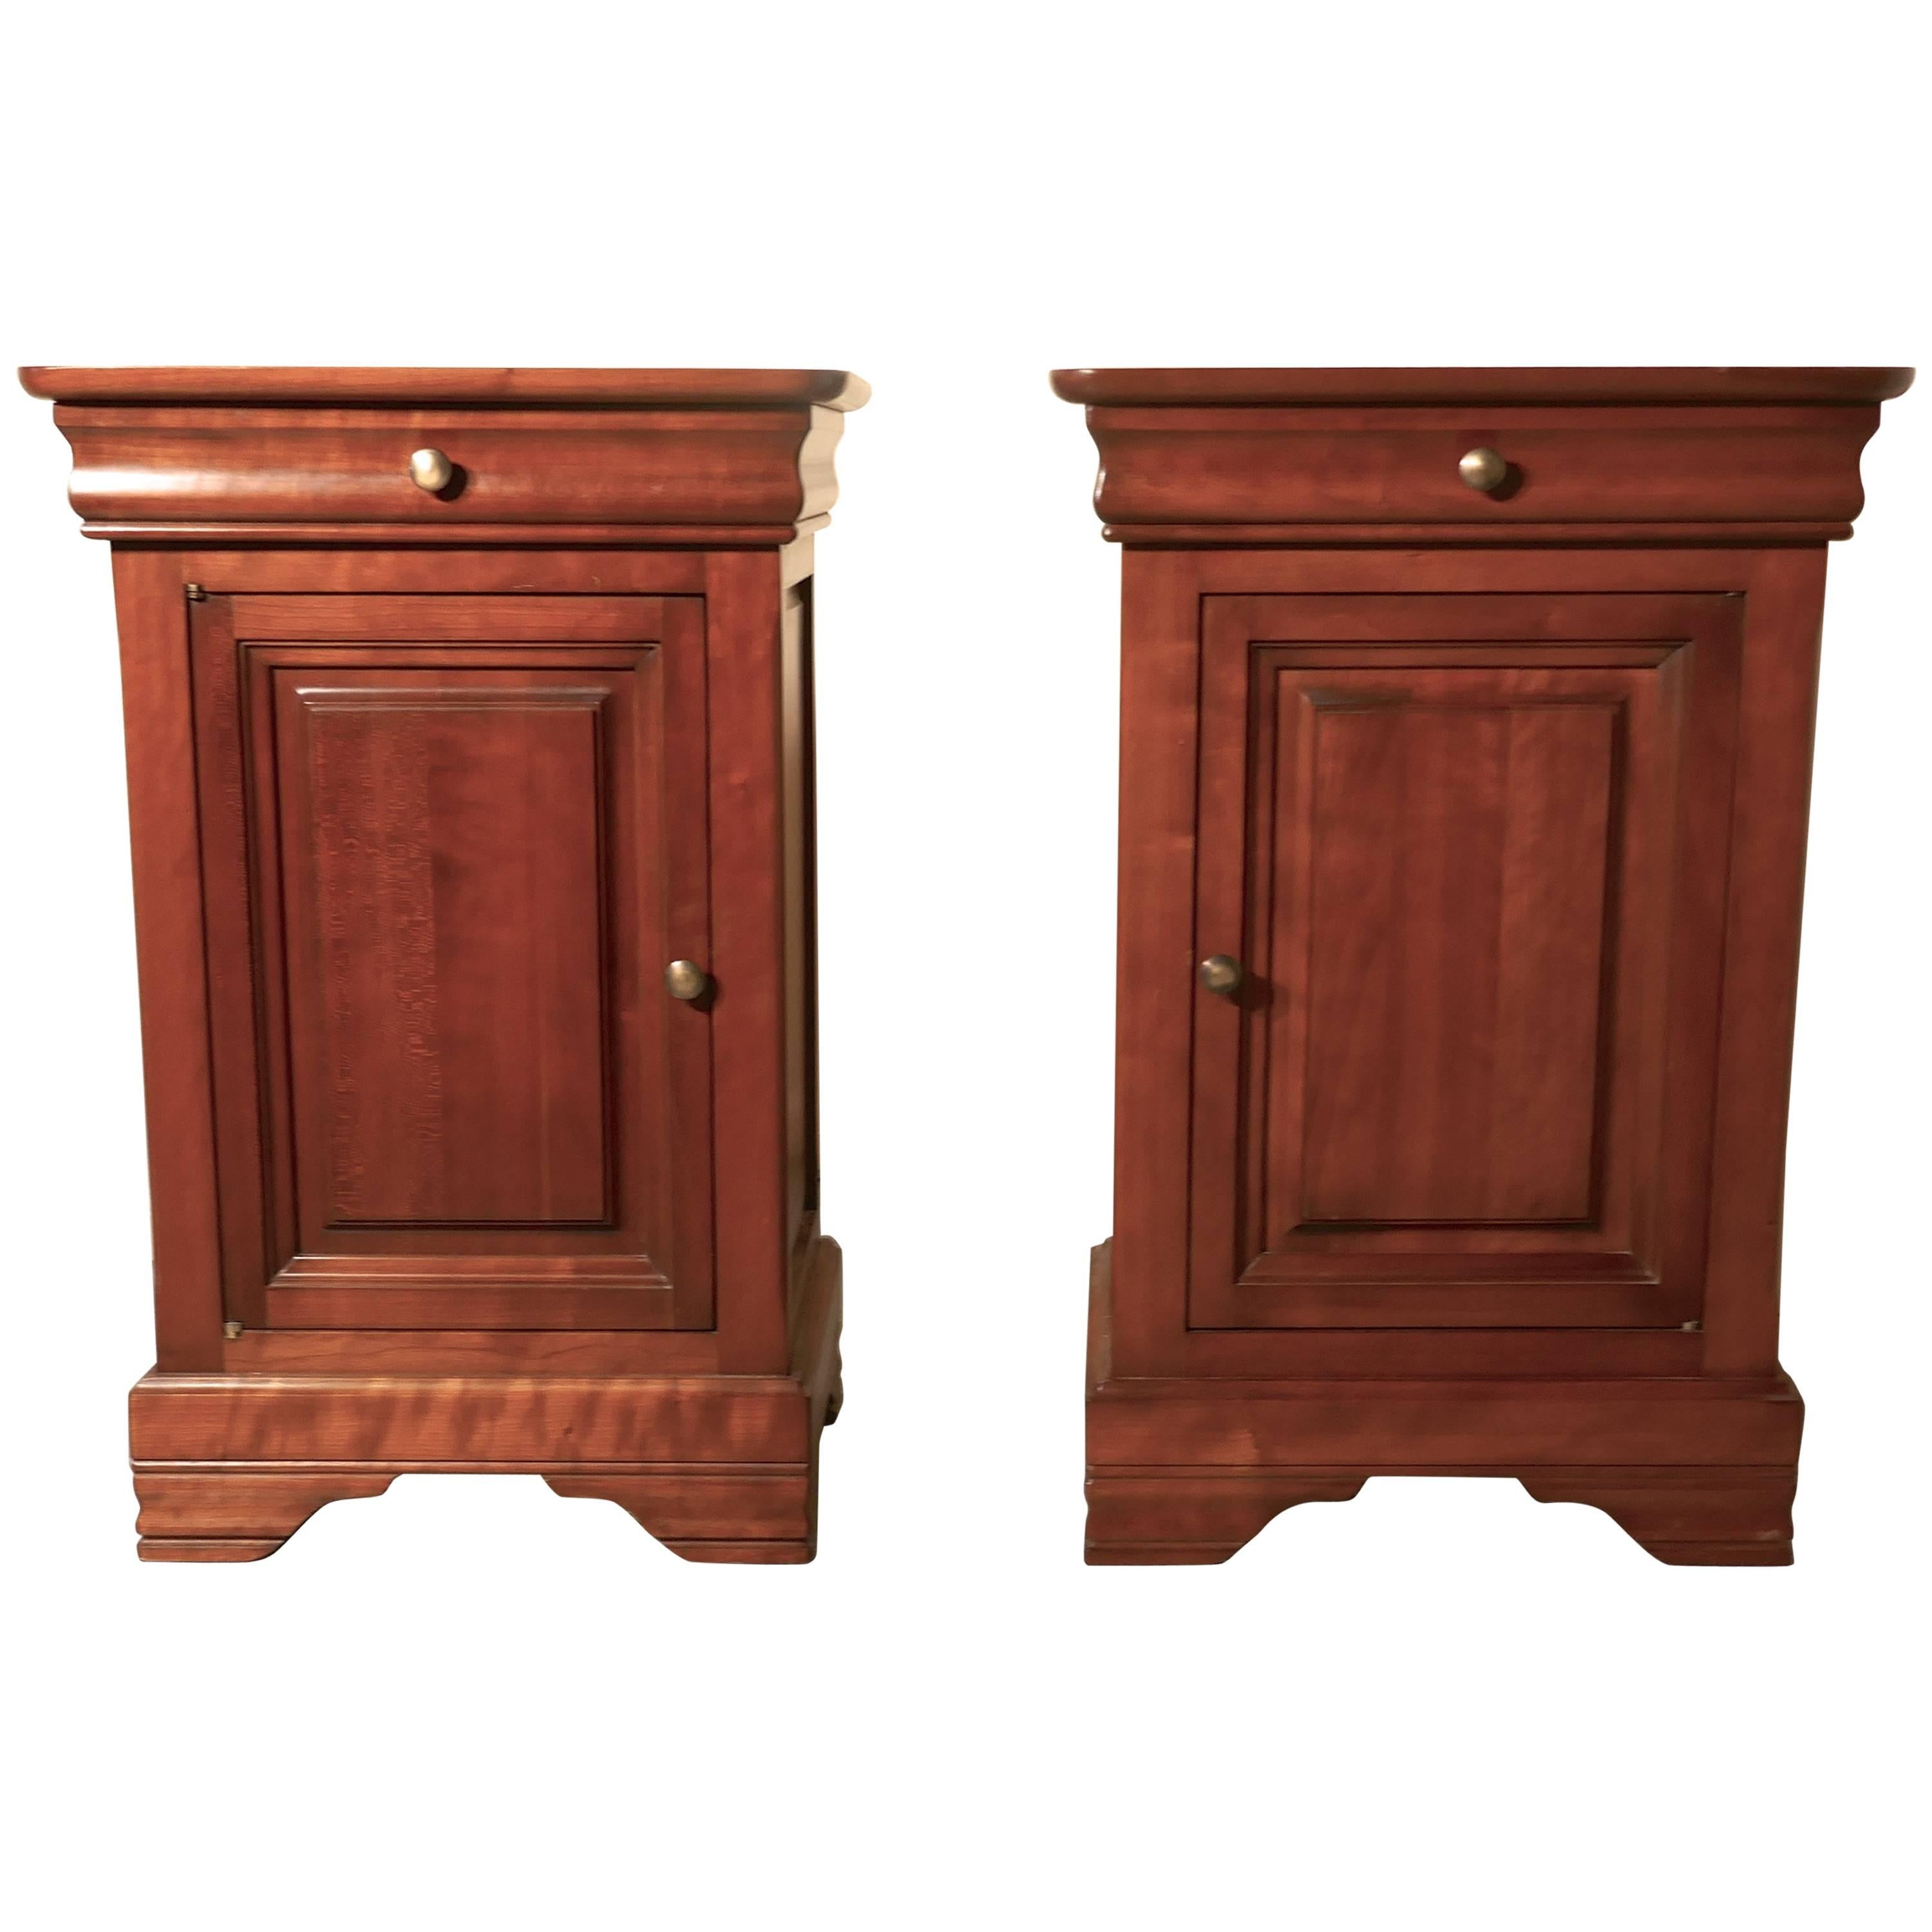 Pair of French Cherrywood Bedside Cupboards or Night Tables